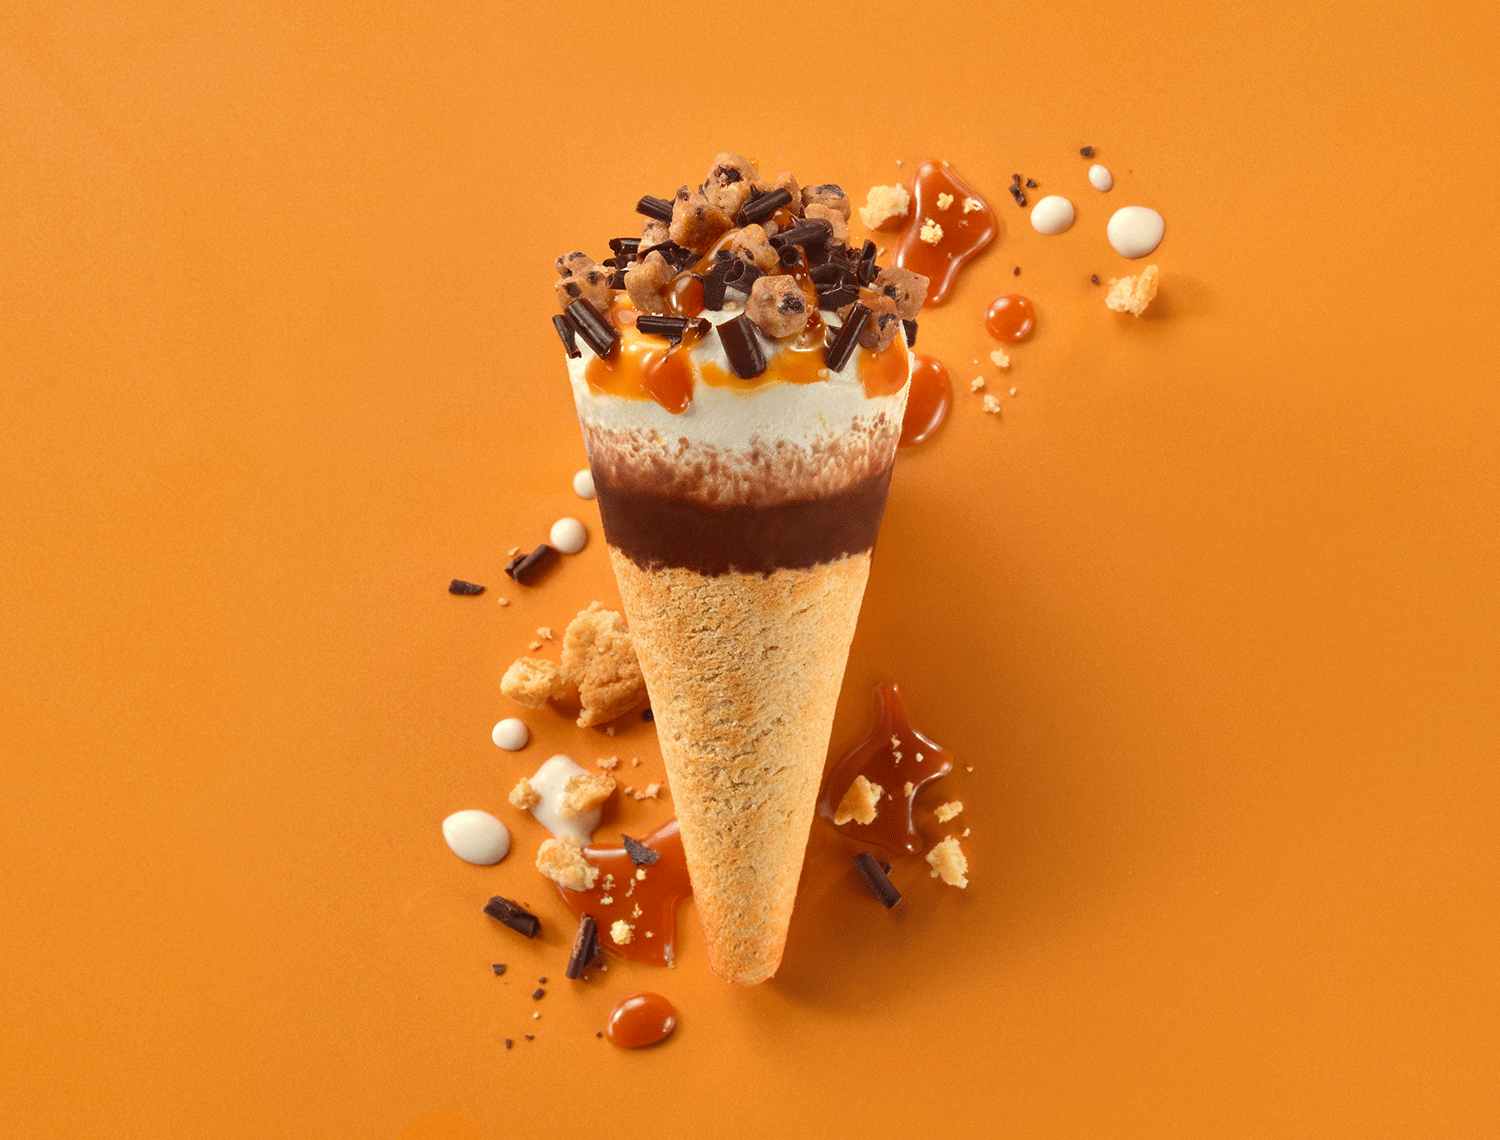 Cookiebutter cone with ice cream chocolate and caramel on an orange background